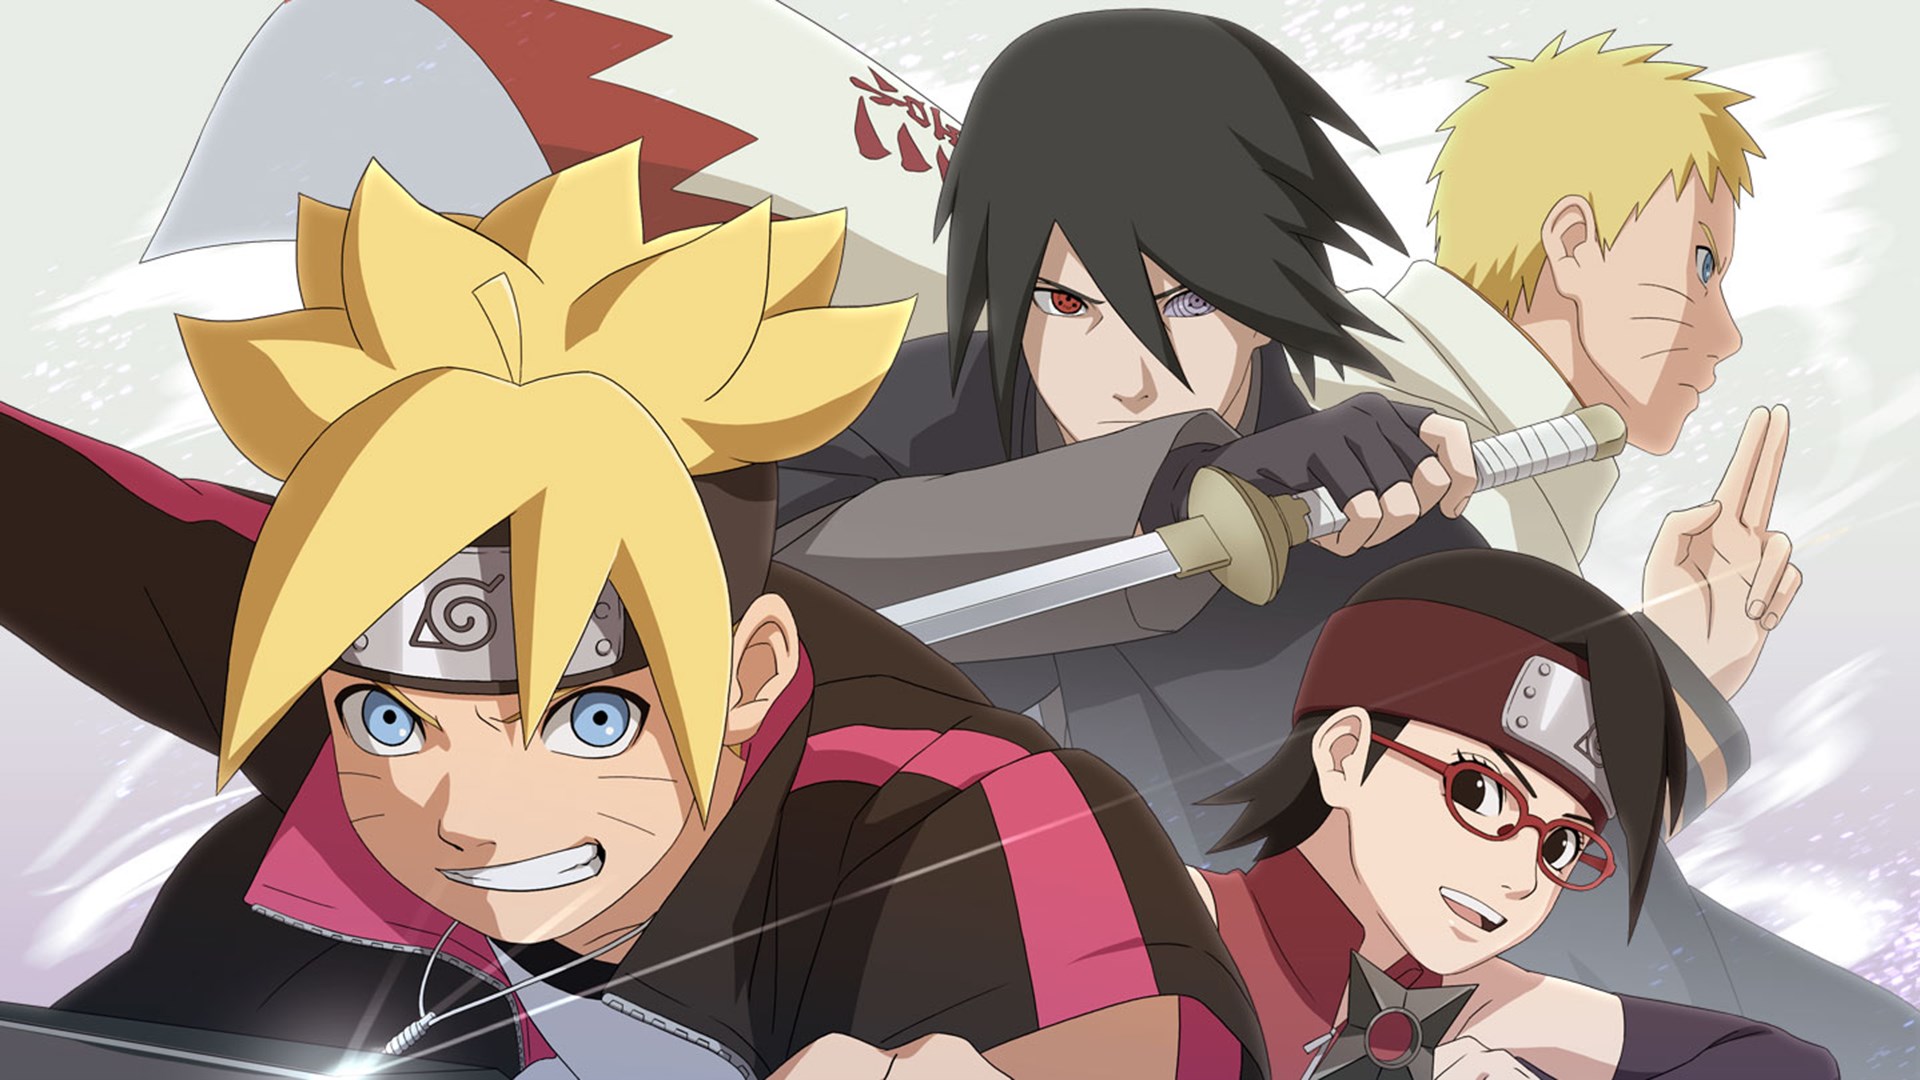 forget Body authority Buy NARUTO STORM 4 : Road to Boruto Expansion - Microsoft Store en-IL